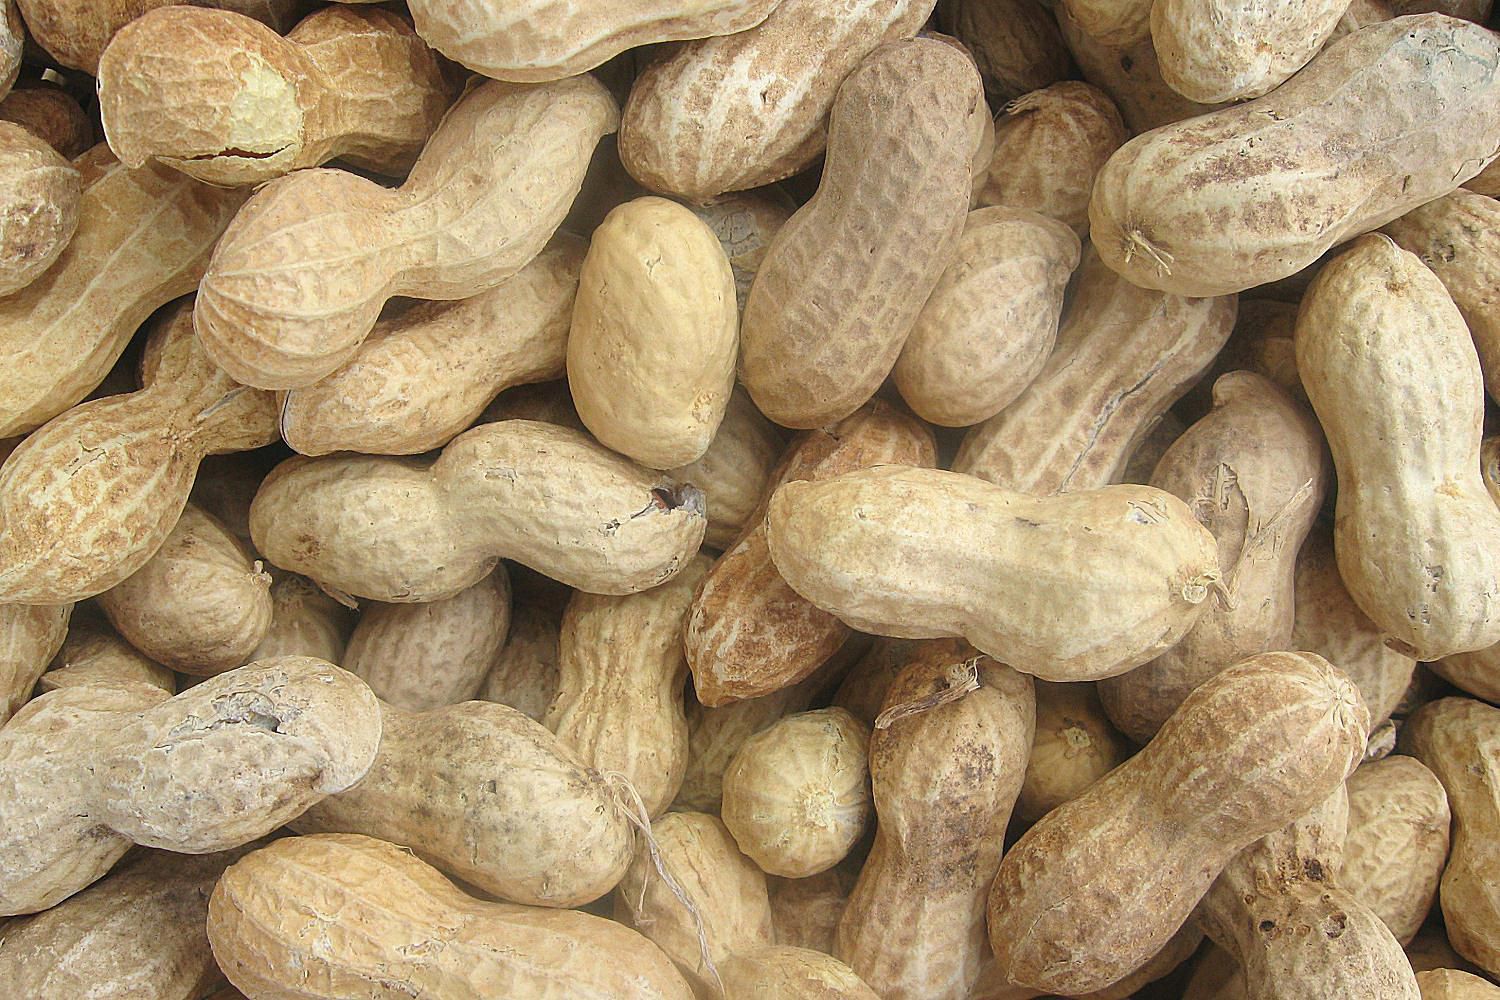 Image result for images of peanuts